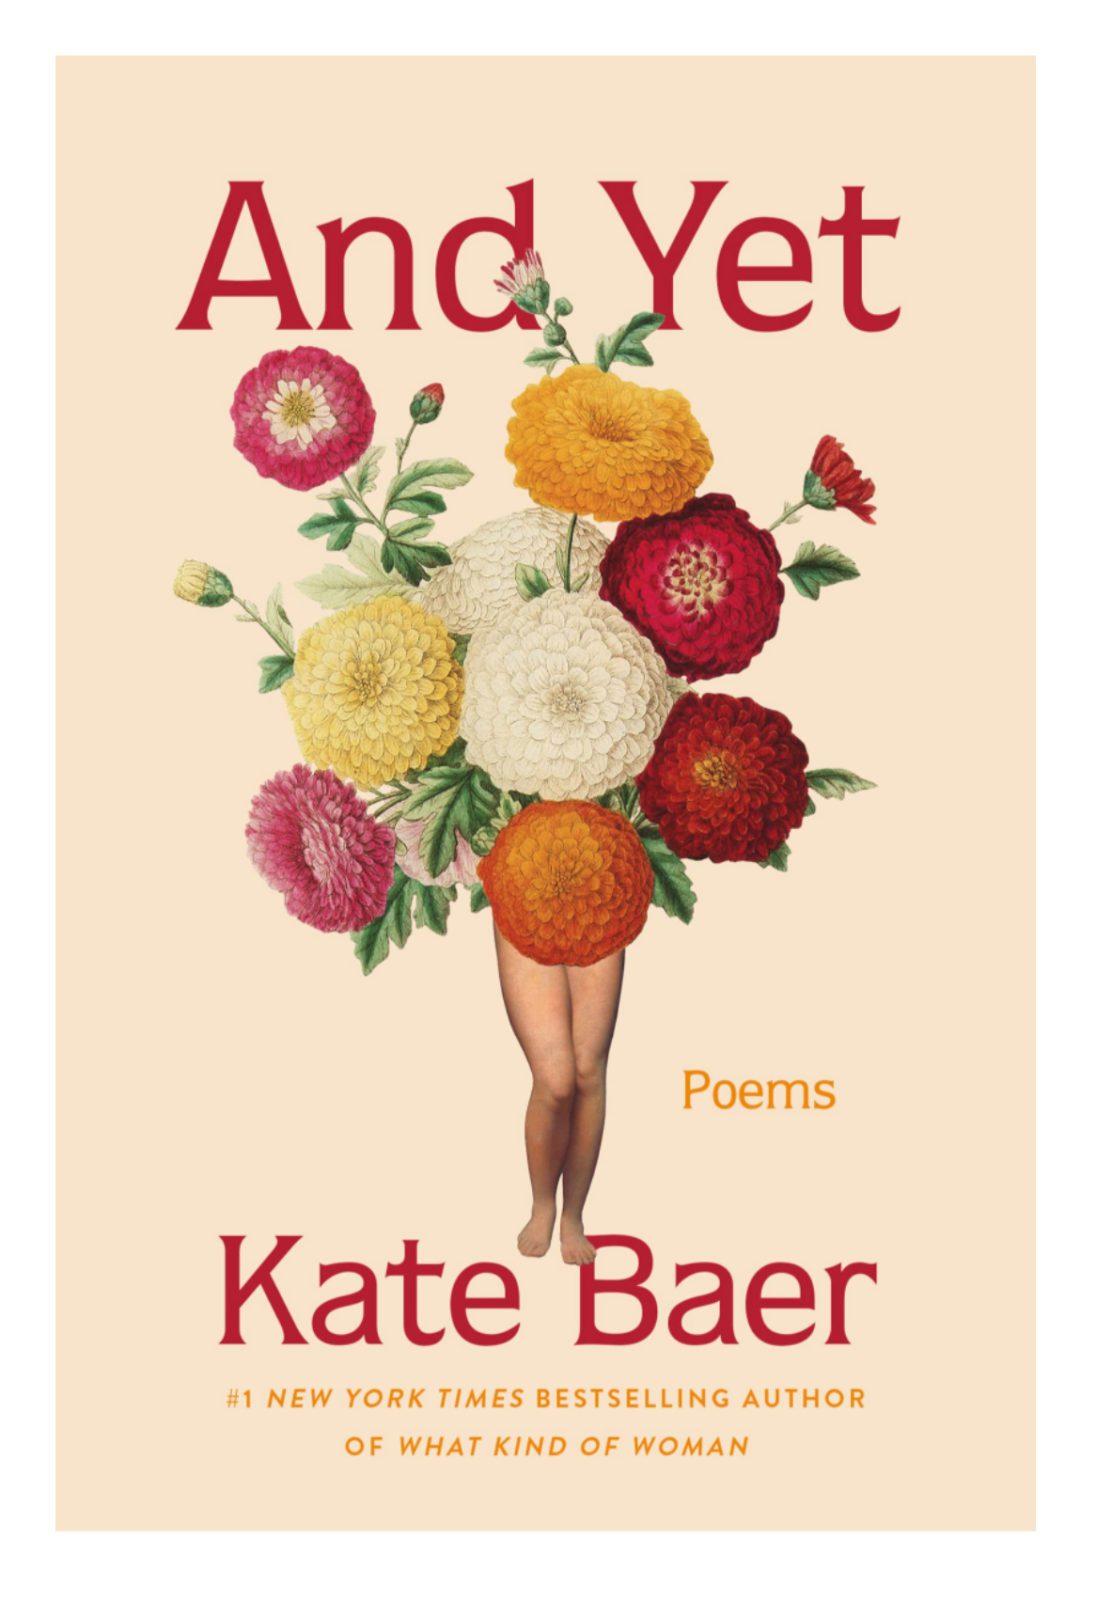 And Yet: Poems by Kate Baer